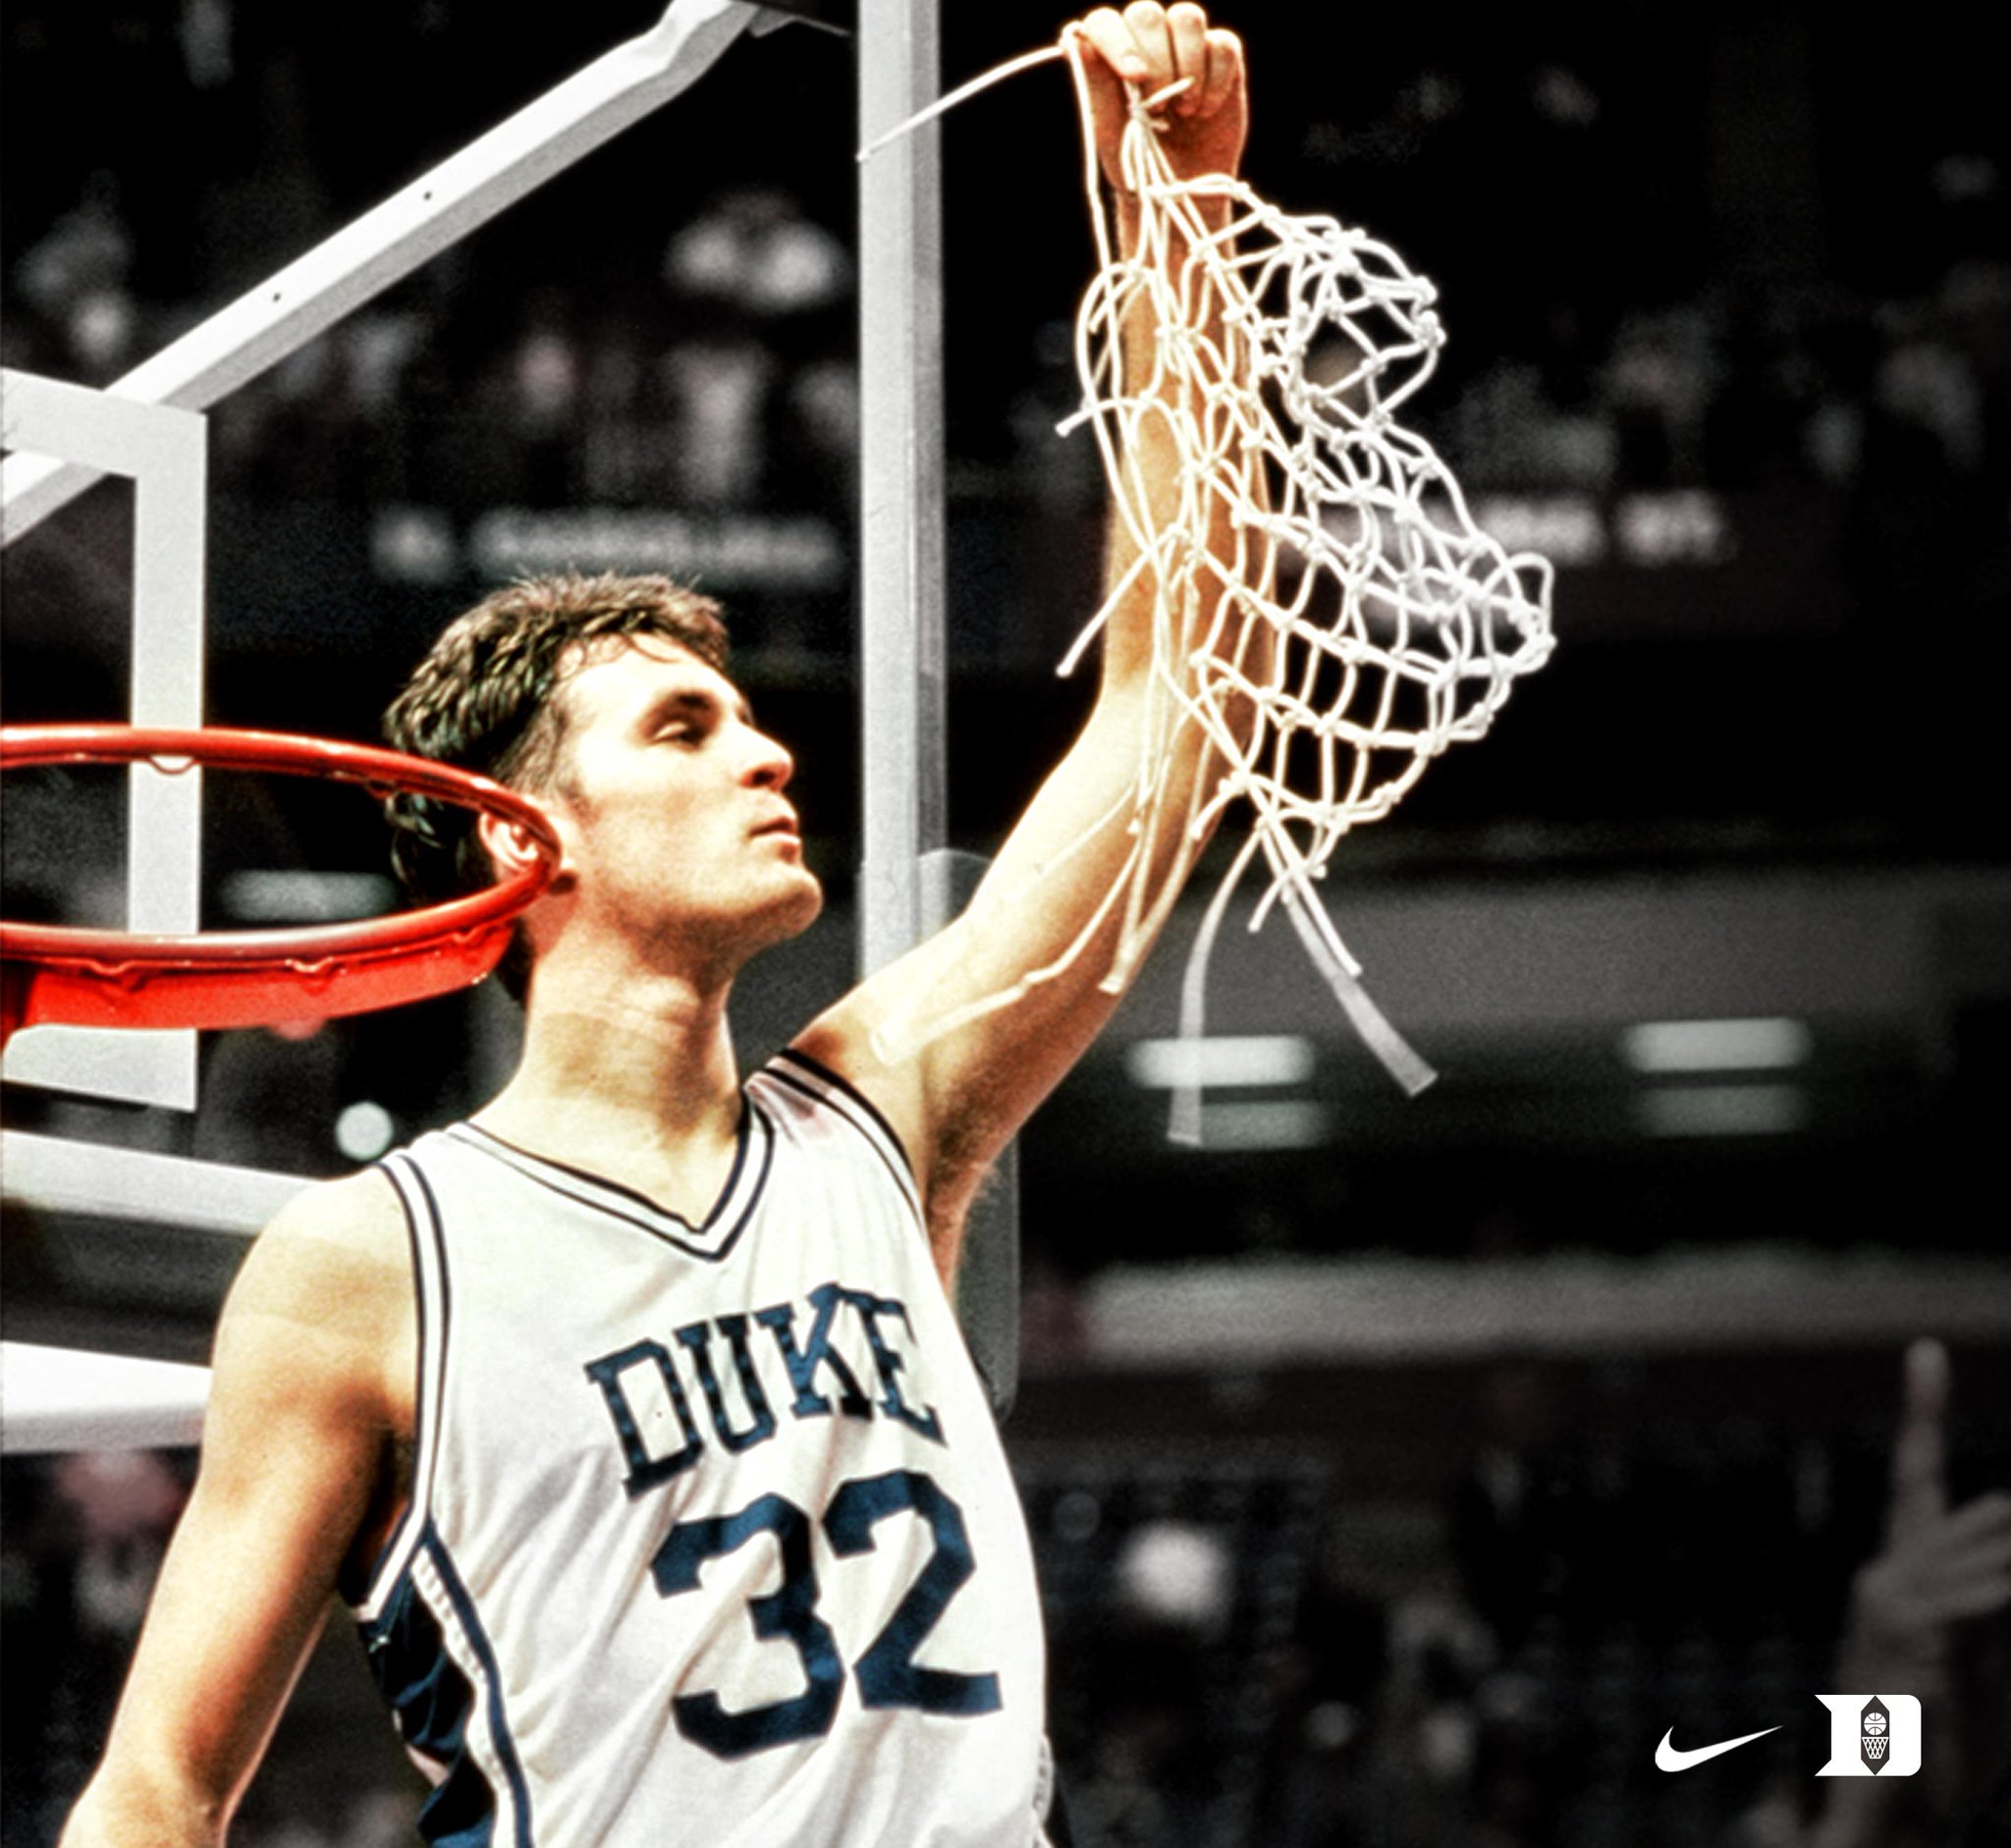 Happy Birthday to the 1992 National Player of the Year and 2x National Champion, Christian Laettner! 